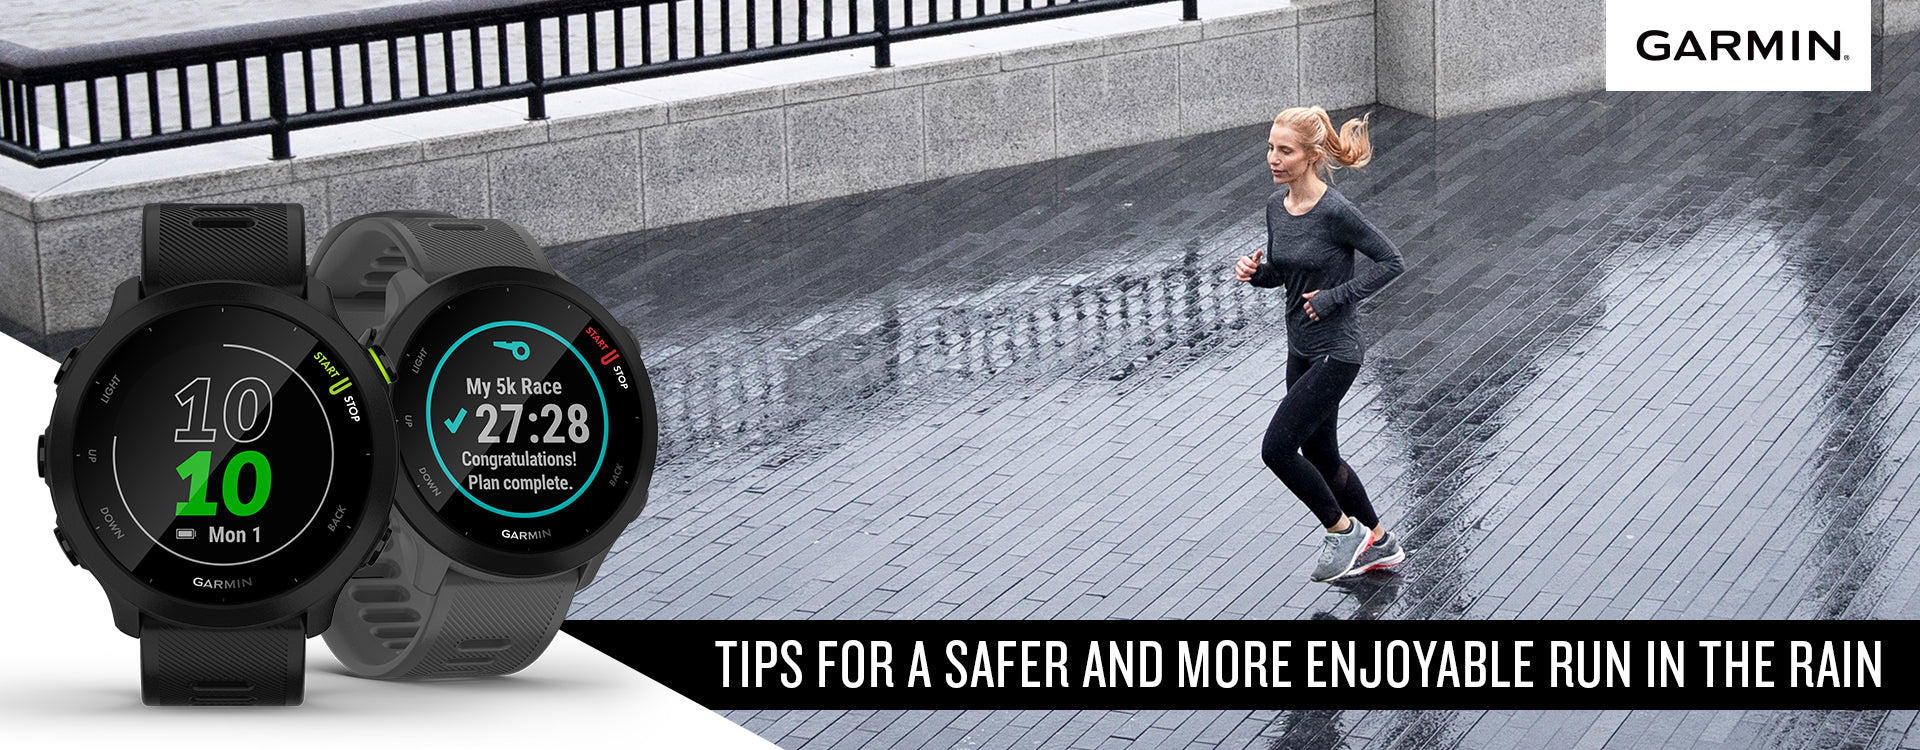 Tips for a Safer and More Enjoyable Run in the Rain